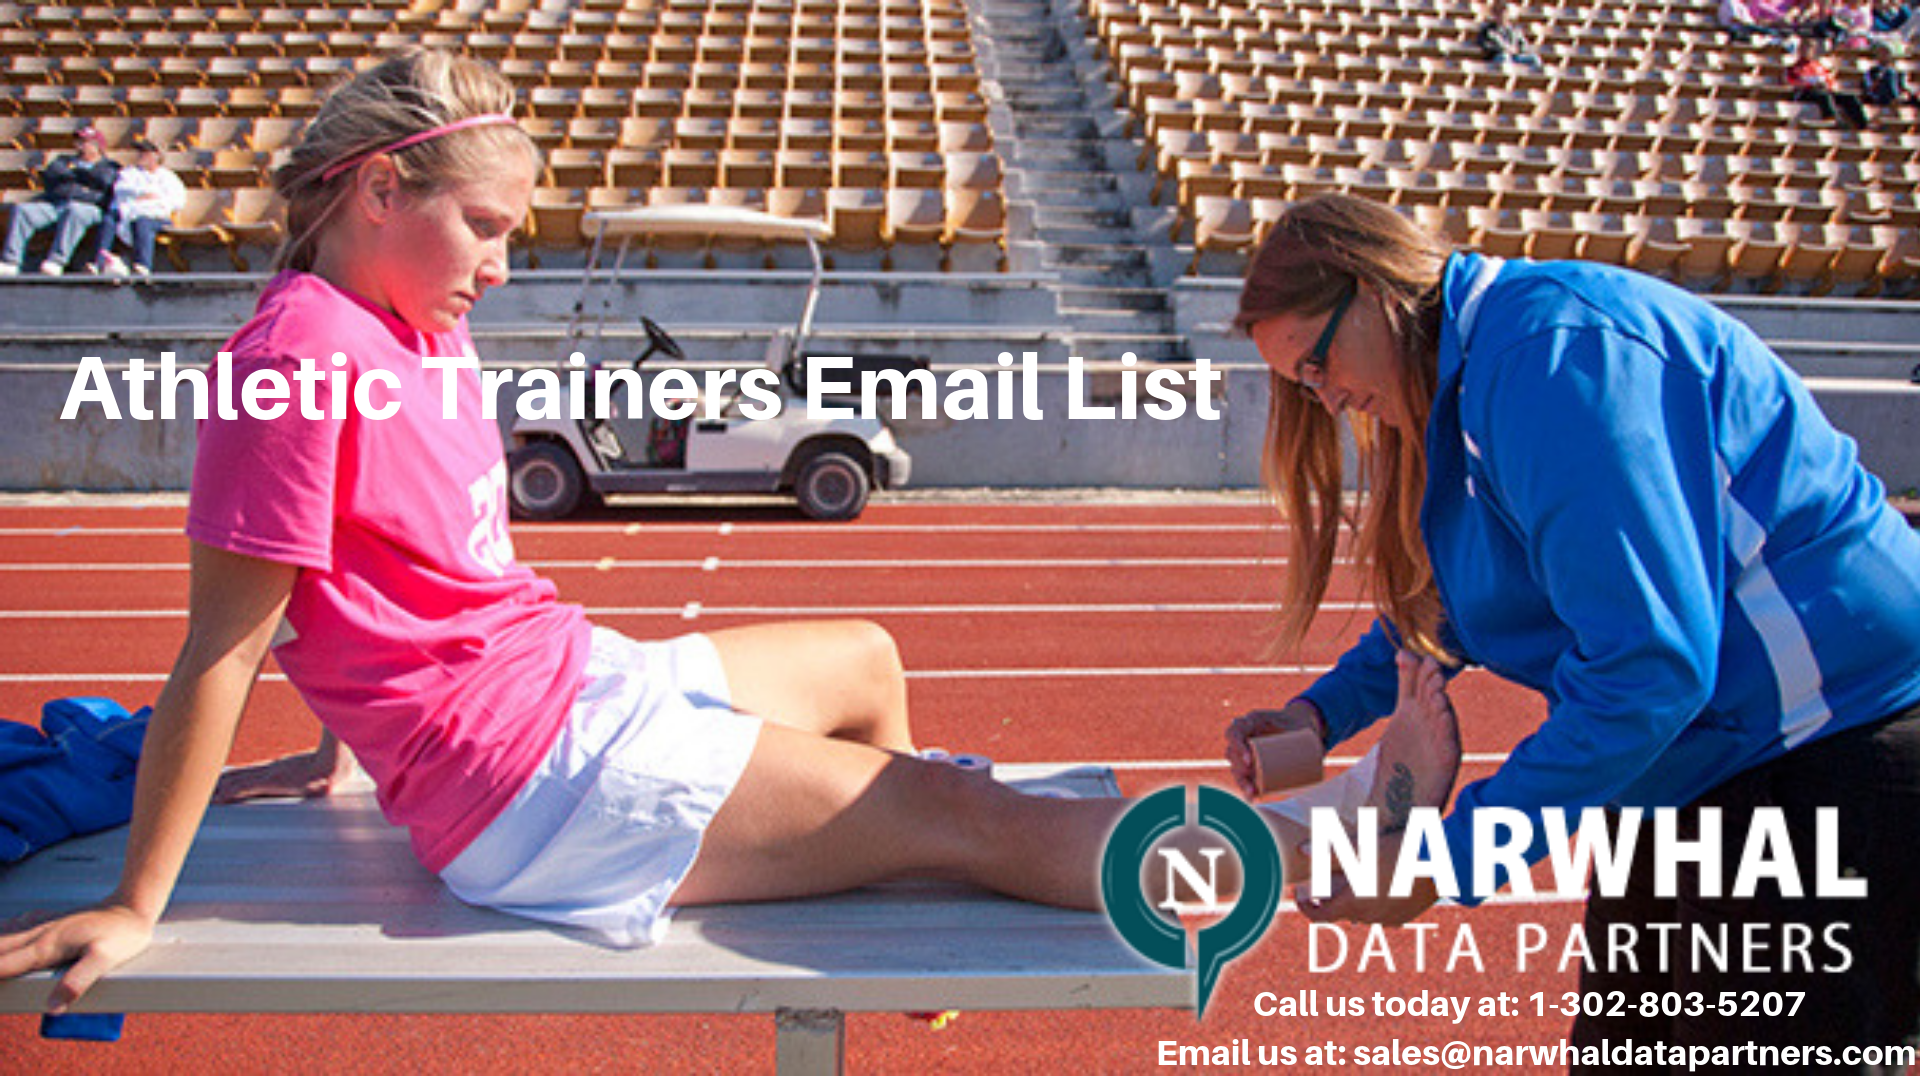 http://narwhaldatapartners.com/athletic-trainers-email-list.html